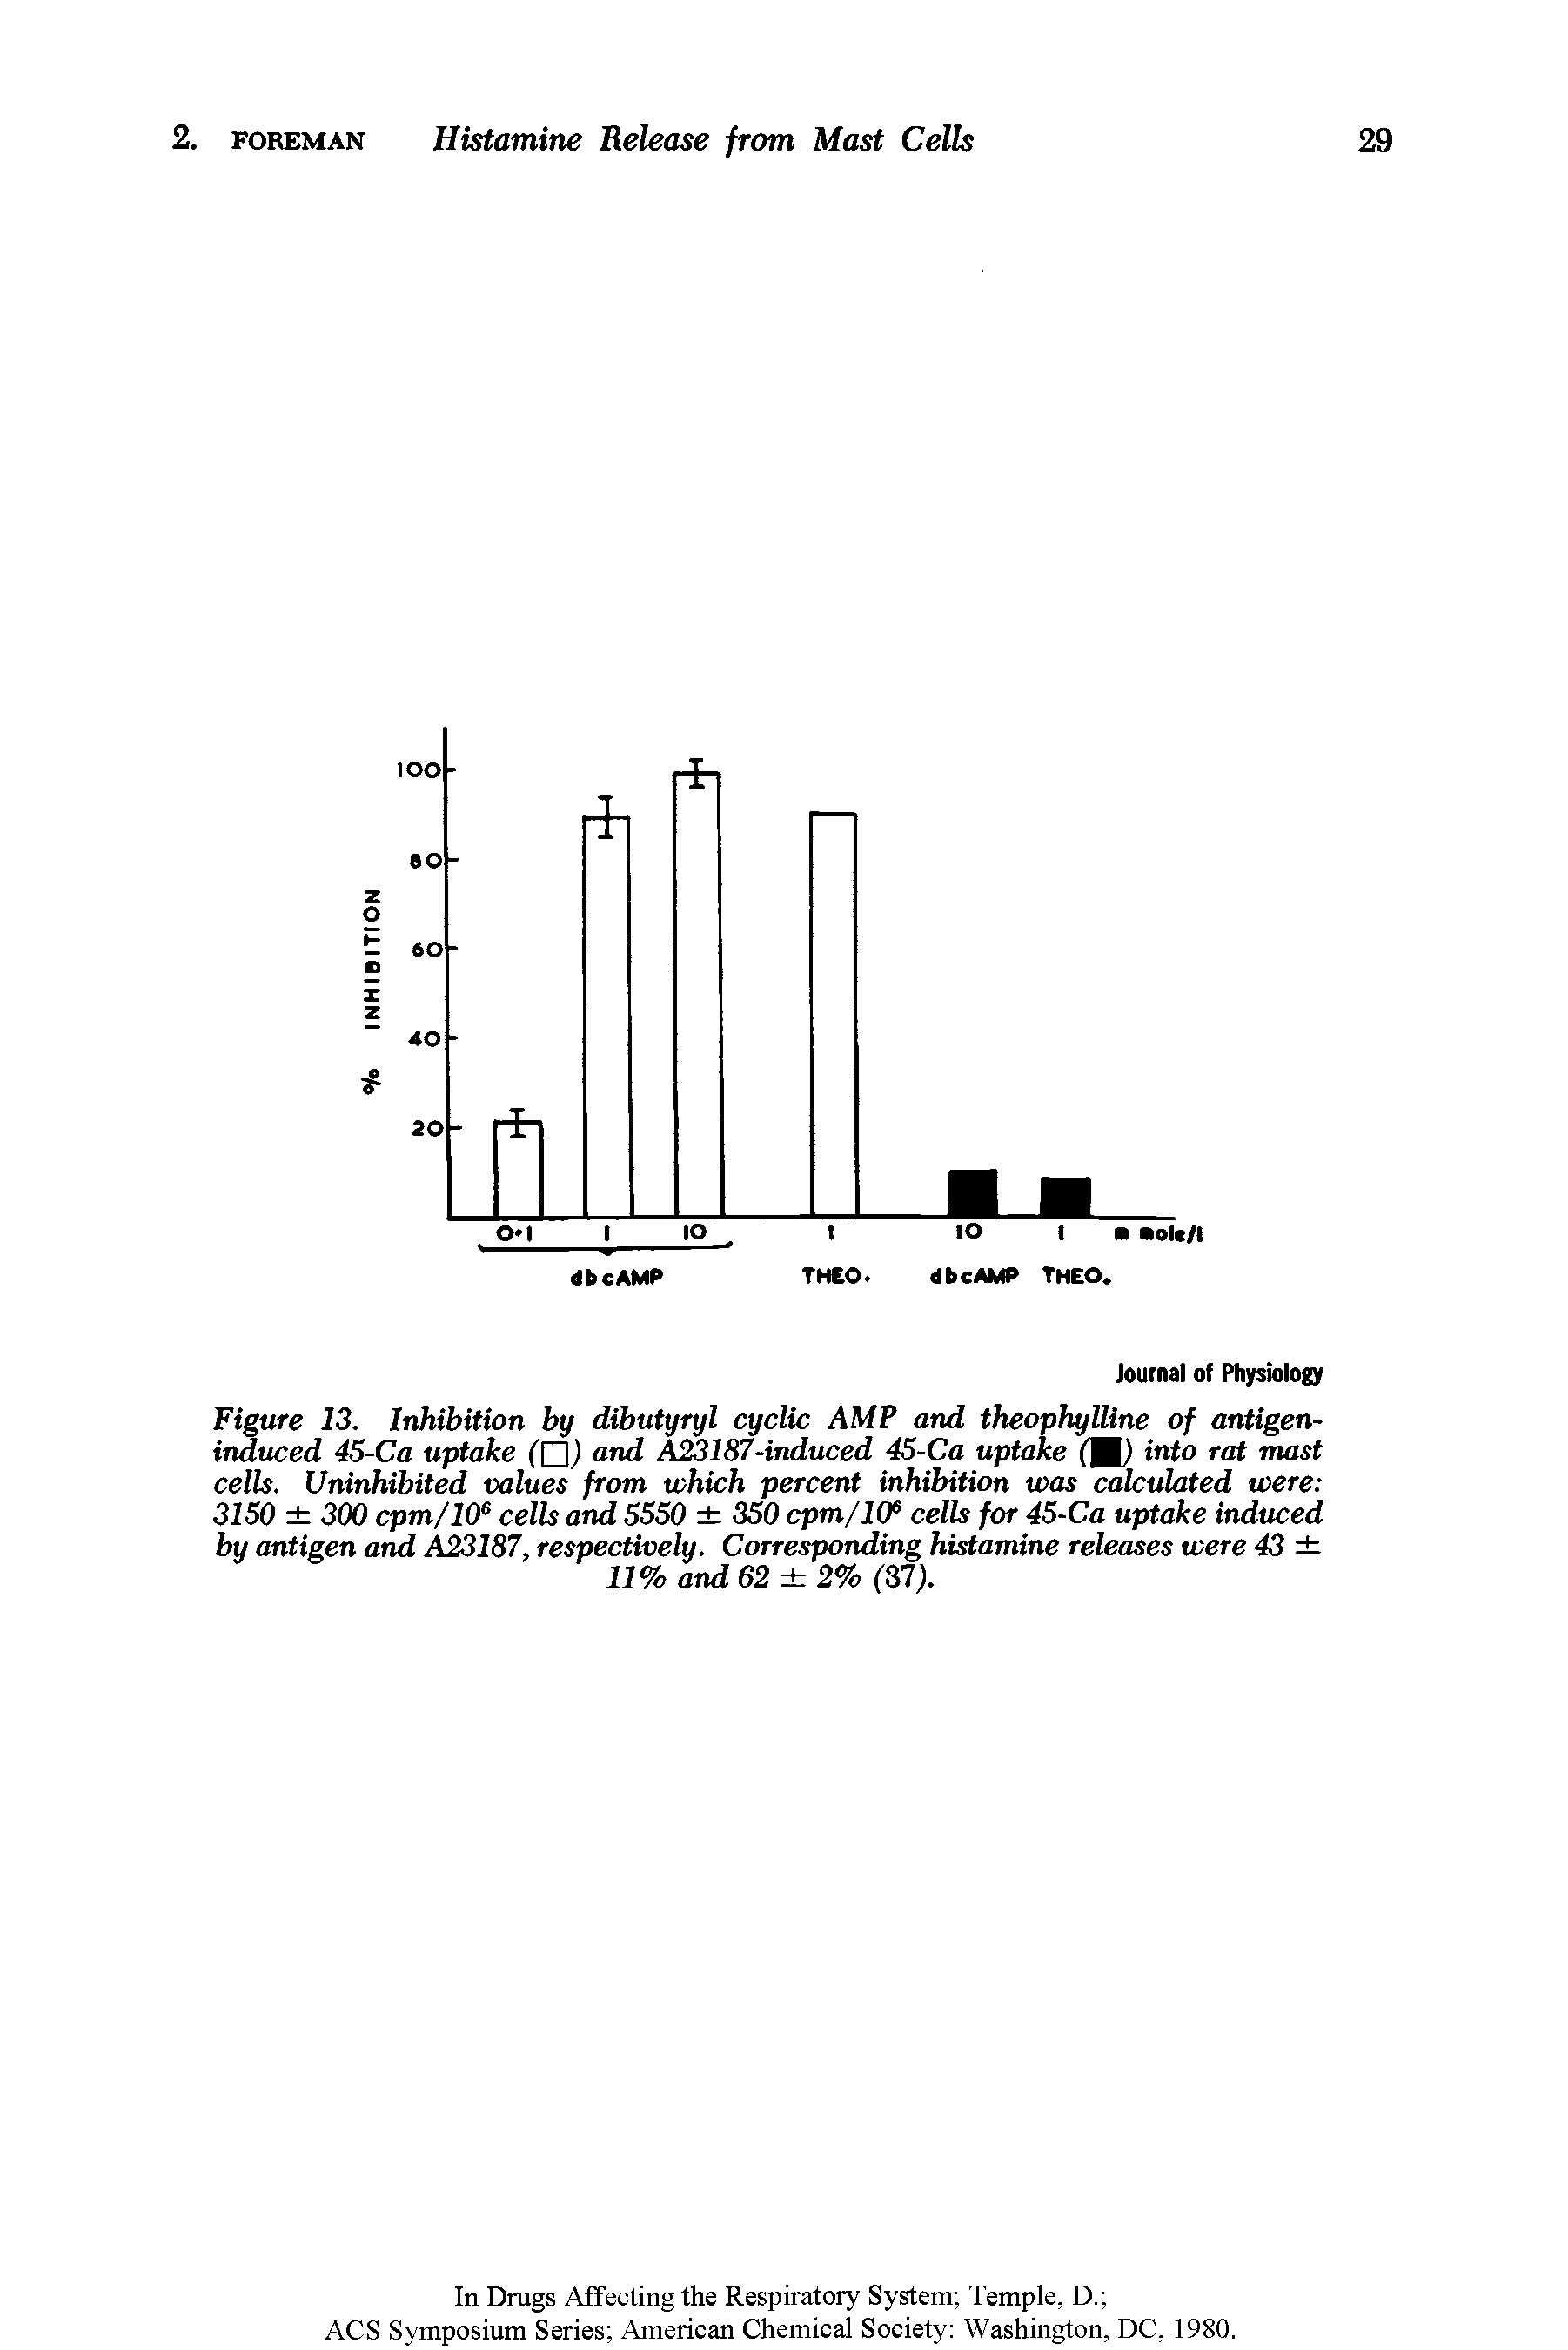 Figure 13. Inhibition by dibutyryl cyclic AMP and theophylline of antigen-induced 4S-Ca uptake Cn and A23187-induced 45-Ca uptake (U) Mo rat mast cells. Uninhibited values from which percent inhibition was calculated were 3150 300 cpm/10 cells and 5550 350 cpm/l(P cells for 45-Ca uptake induced by antigen and A23187, respectively. Corresponding histamine releases were 43 11% and 62 2% (37).